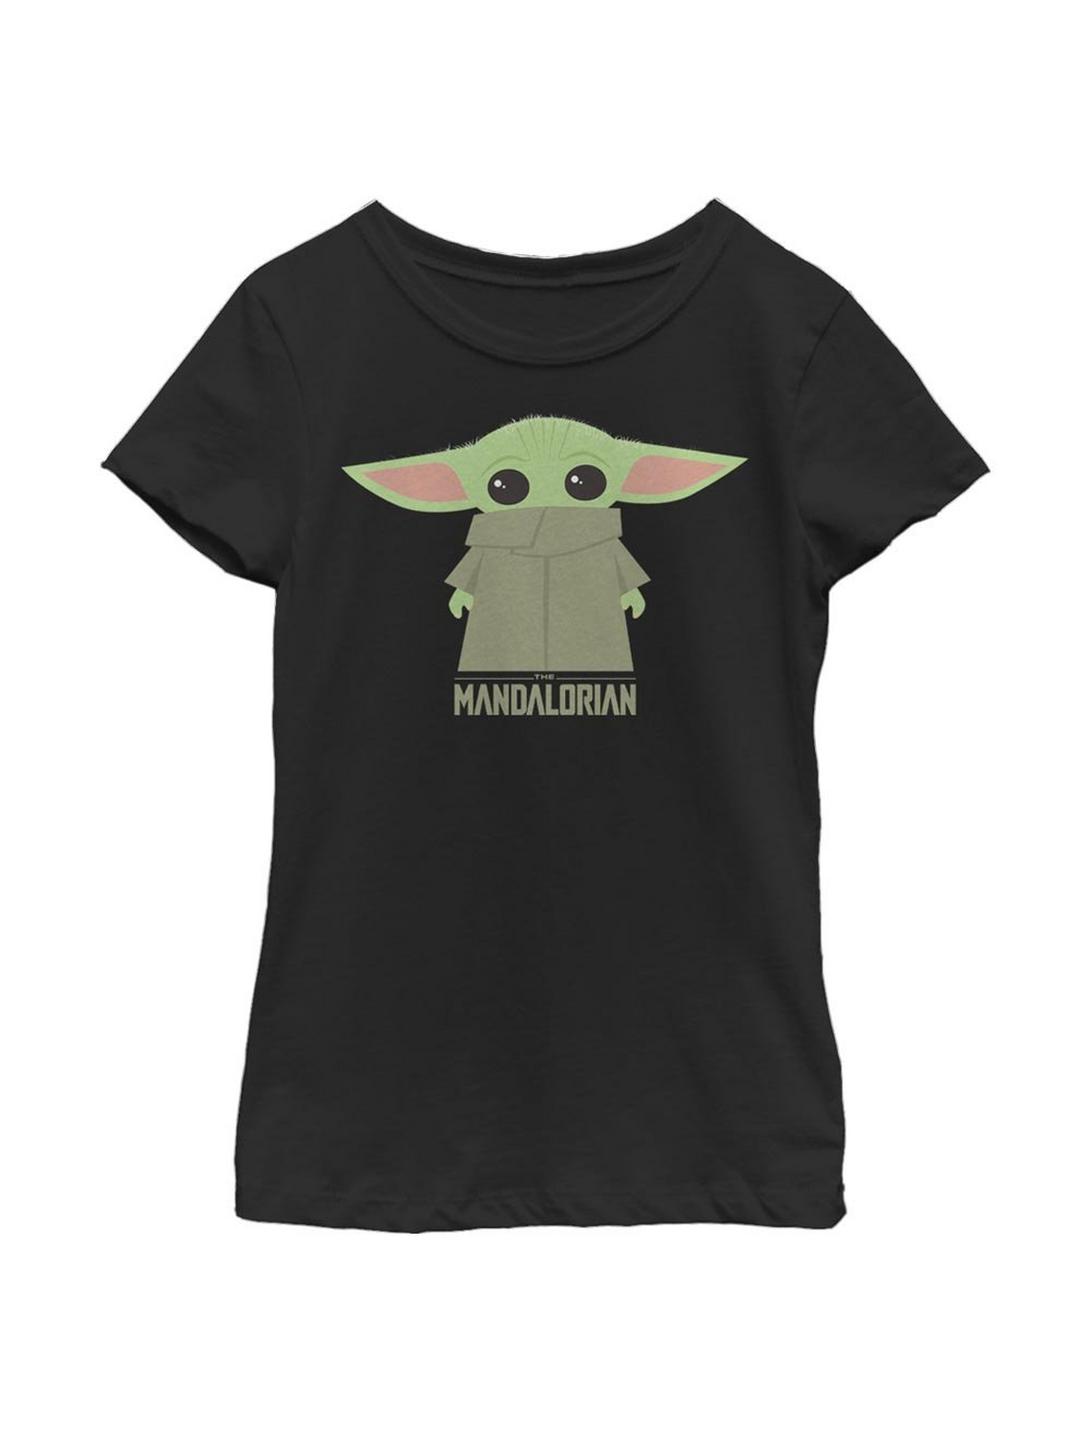 Star Wars The Mandalorian The Child Chibi Covered Face Youth Girls T-Shirt, BLACK, hi-res